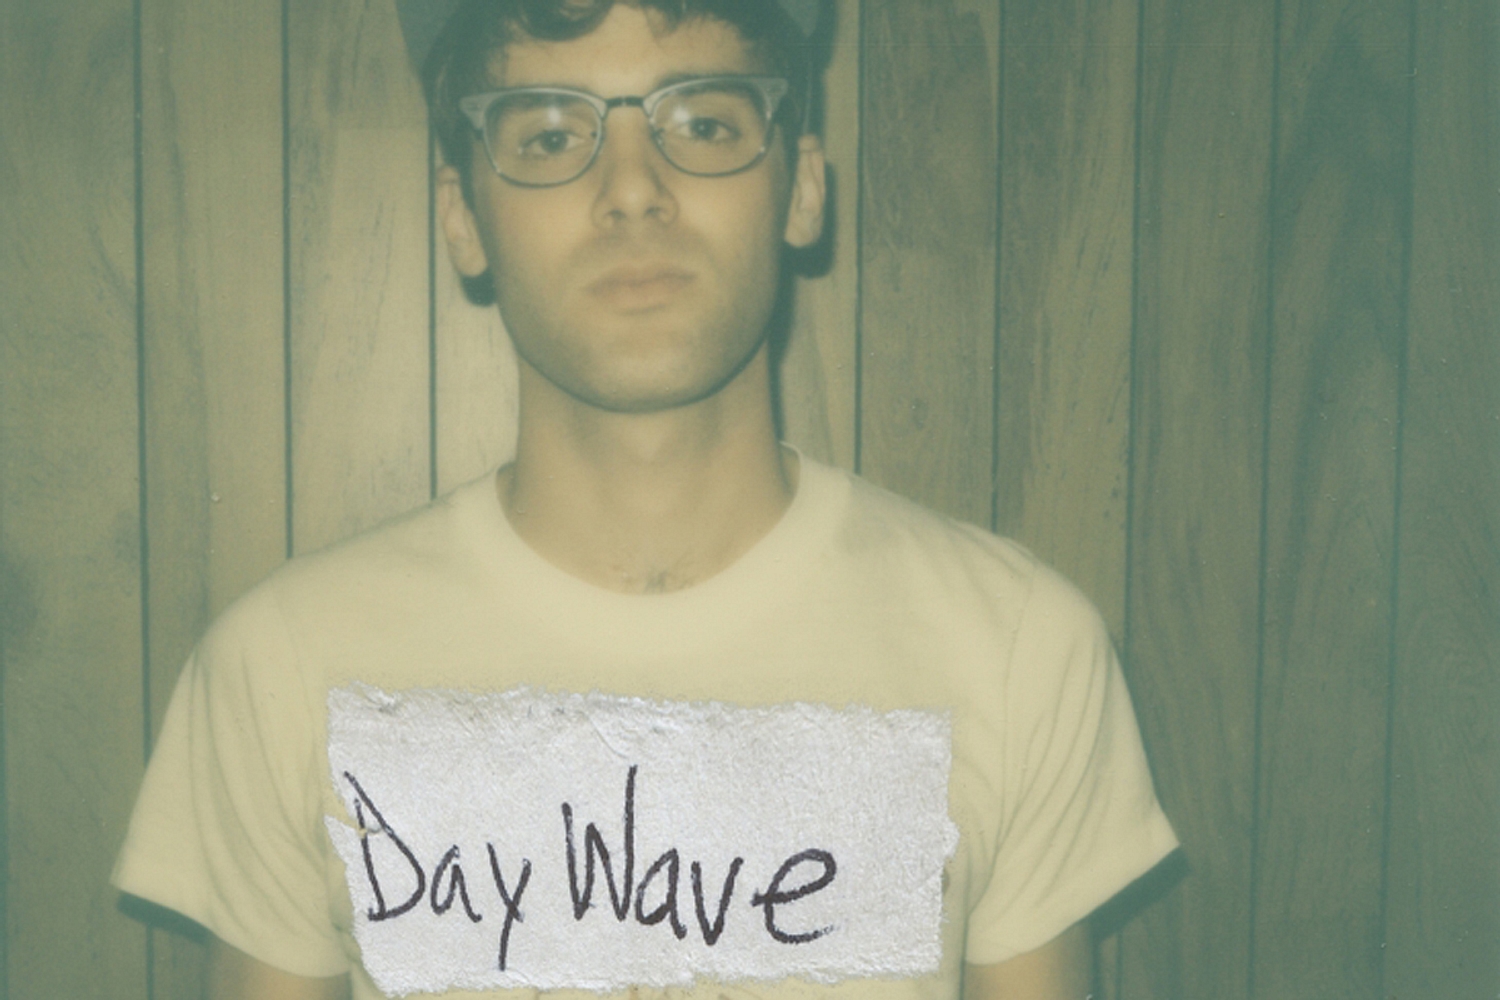 Day Wave releases ‘Come Home Now’ video